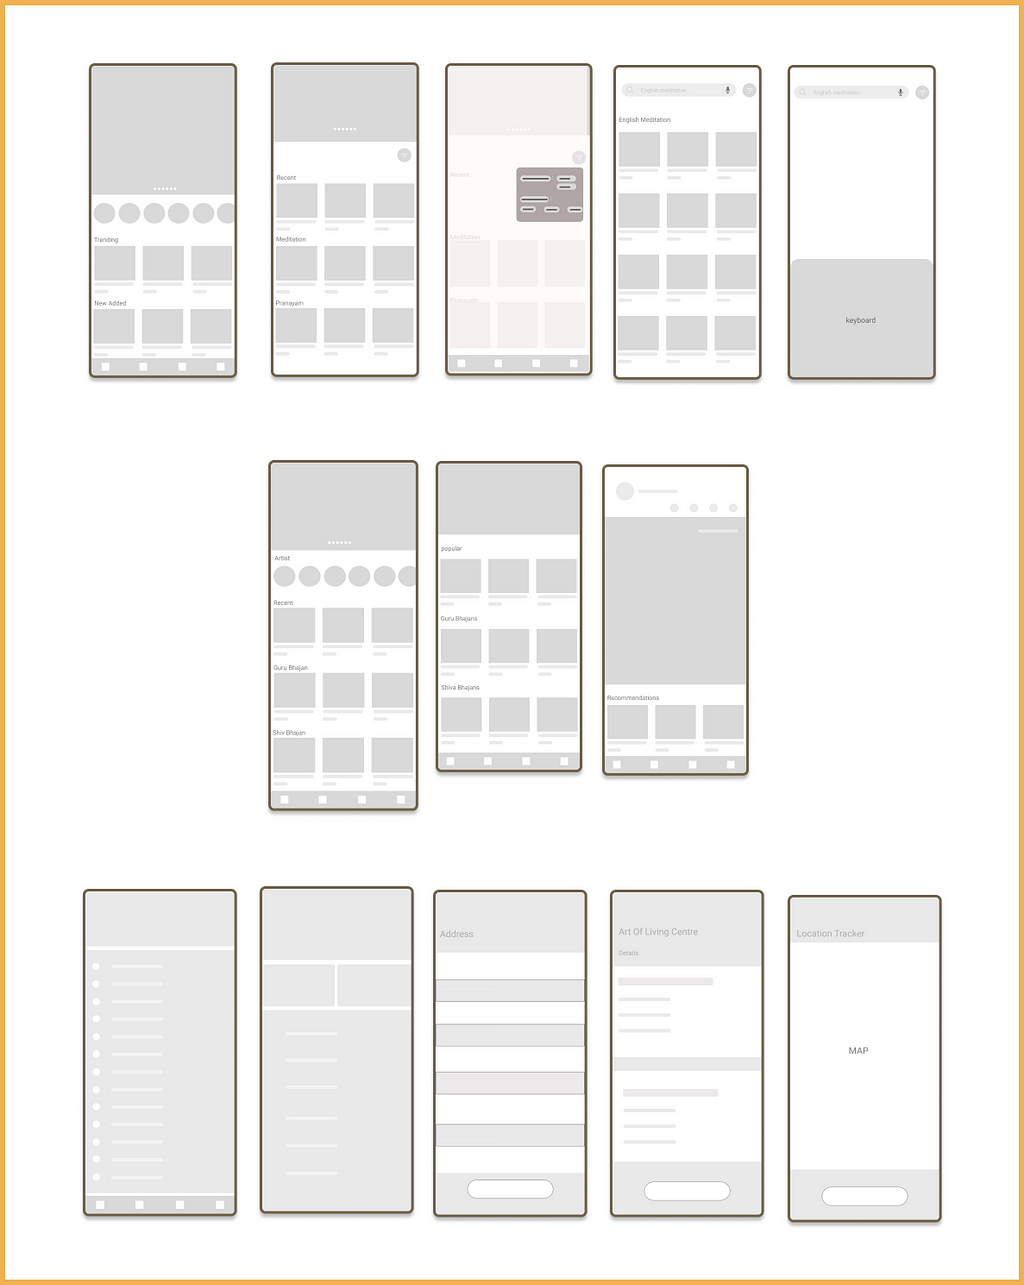 The low-fidelity wireframe image of redesigned features of Art of living app.